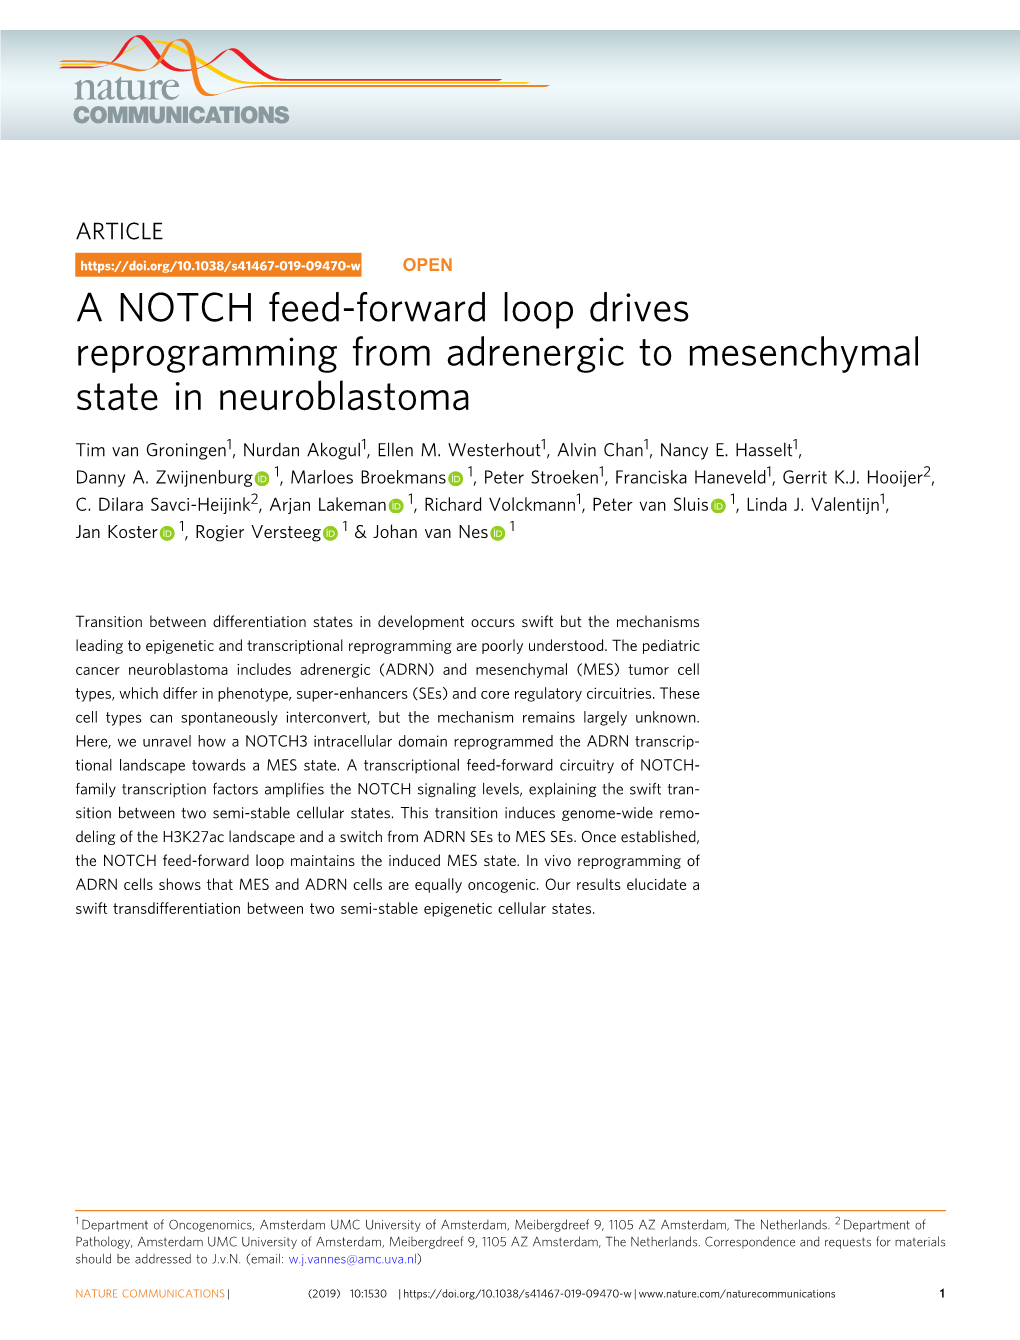 A NOTCH Feed-Forward Loop Drives Reprogramming from Adrenergic to Mesenchymal State in Neuroblastoma